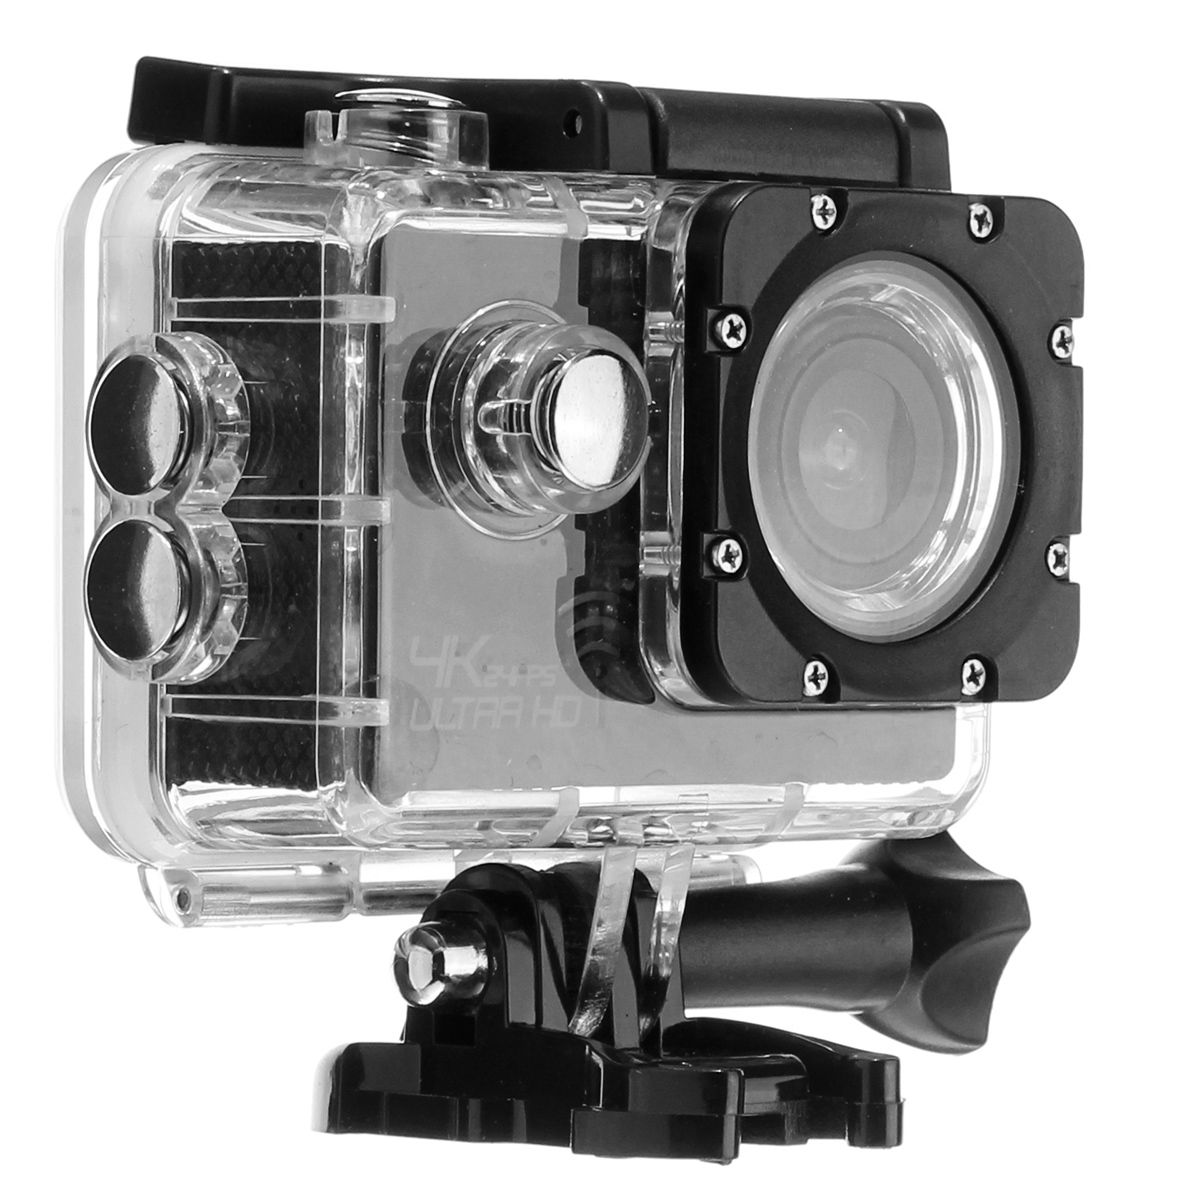 Winksoar-WIFI-Ultra-16MP-HD-720P-Sports-Action-Waterproof-Camera-with-Remote-Control-1599838